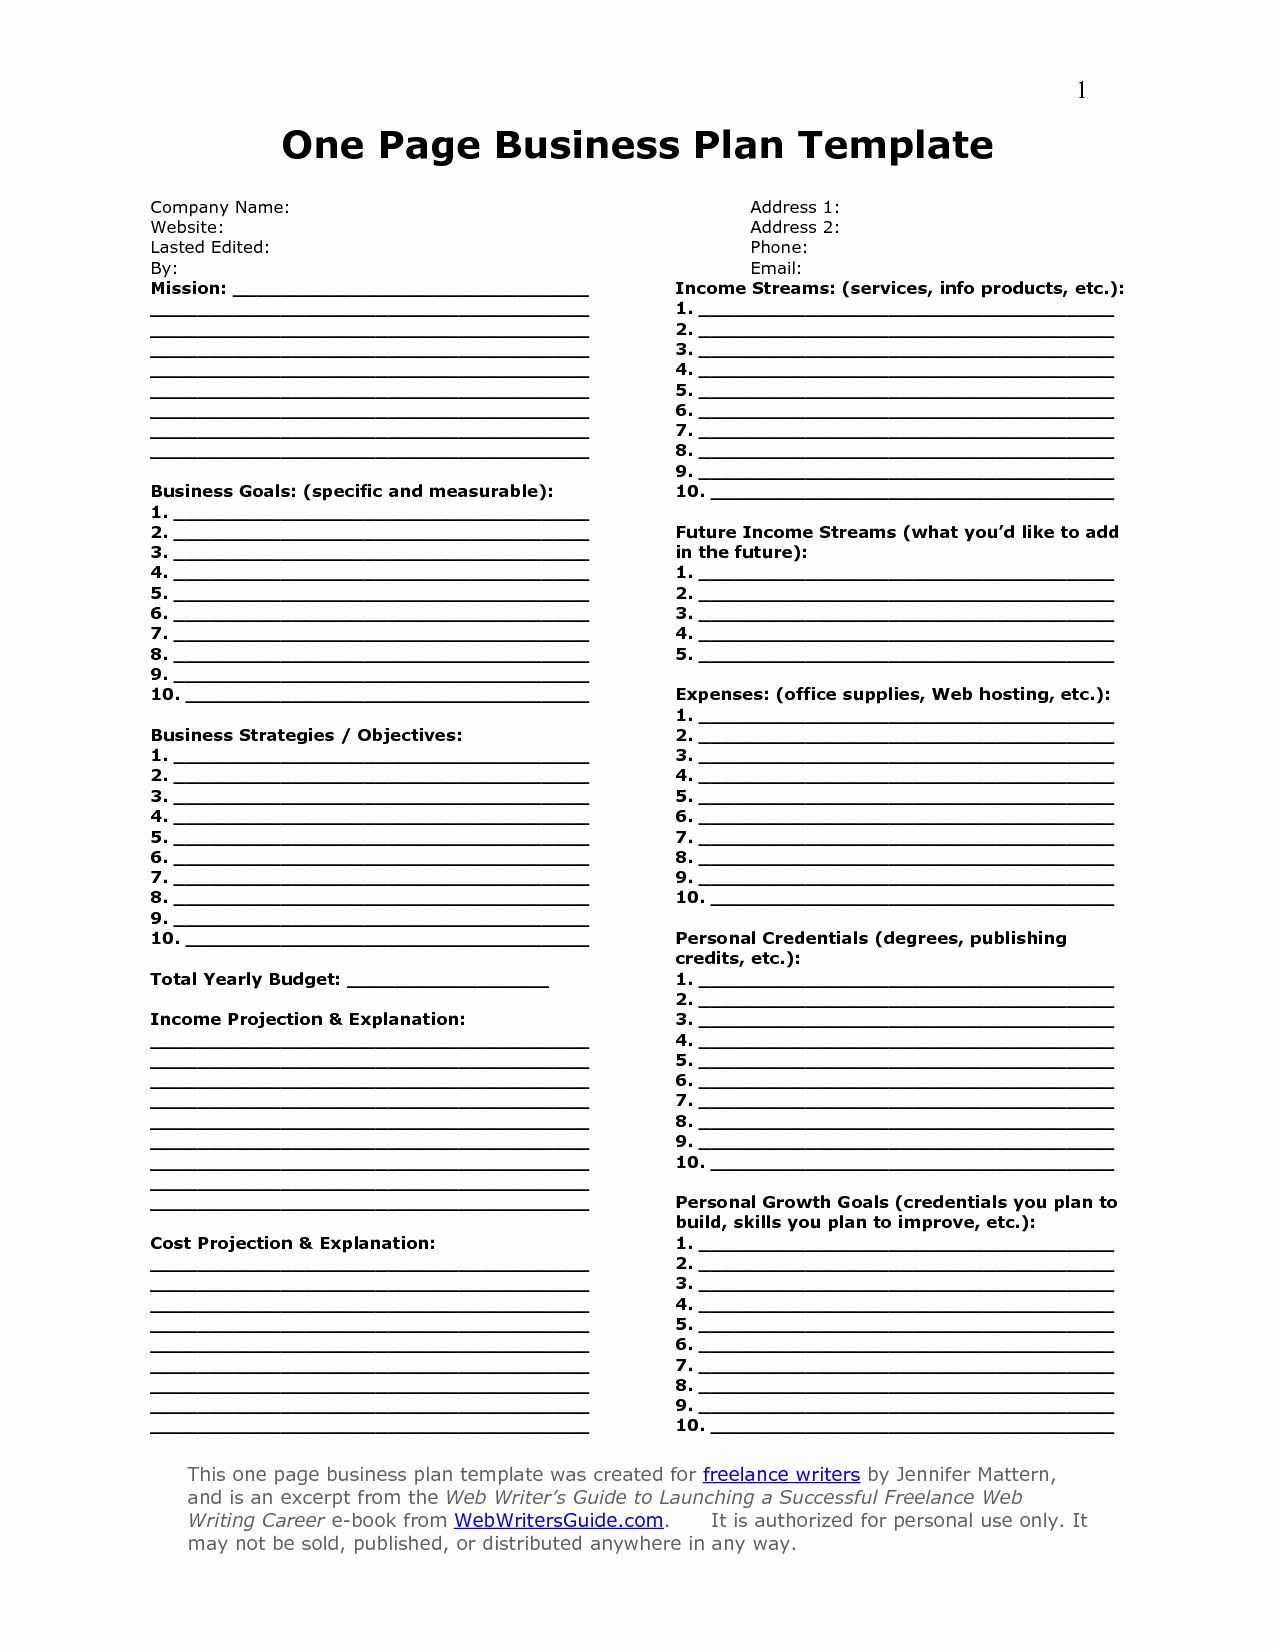 Free Basic Business Plan Template New E Page Business Plan Template